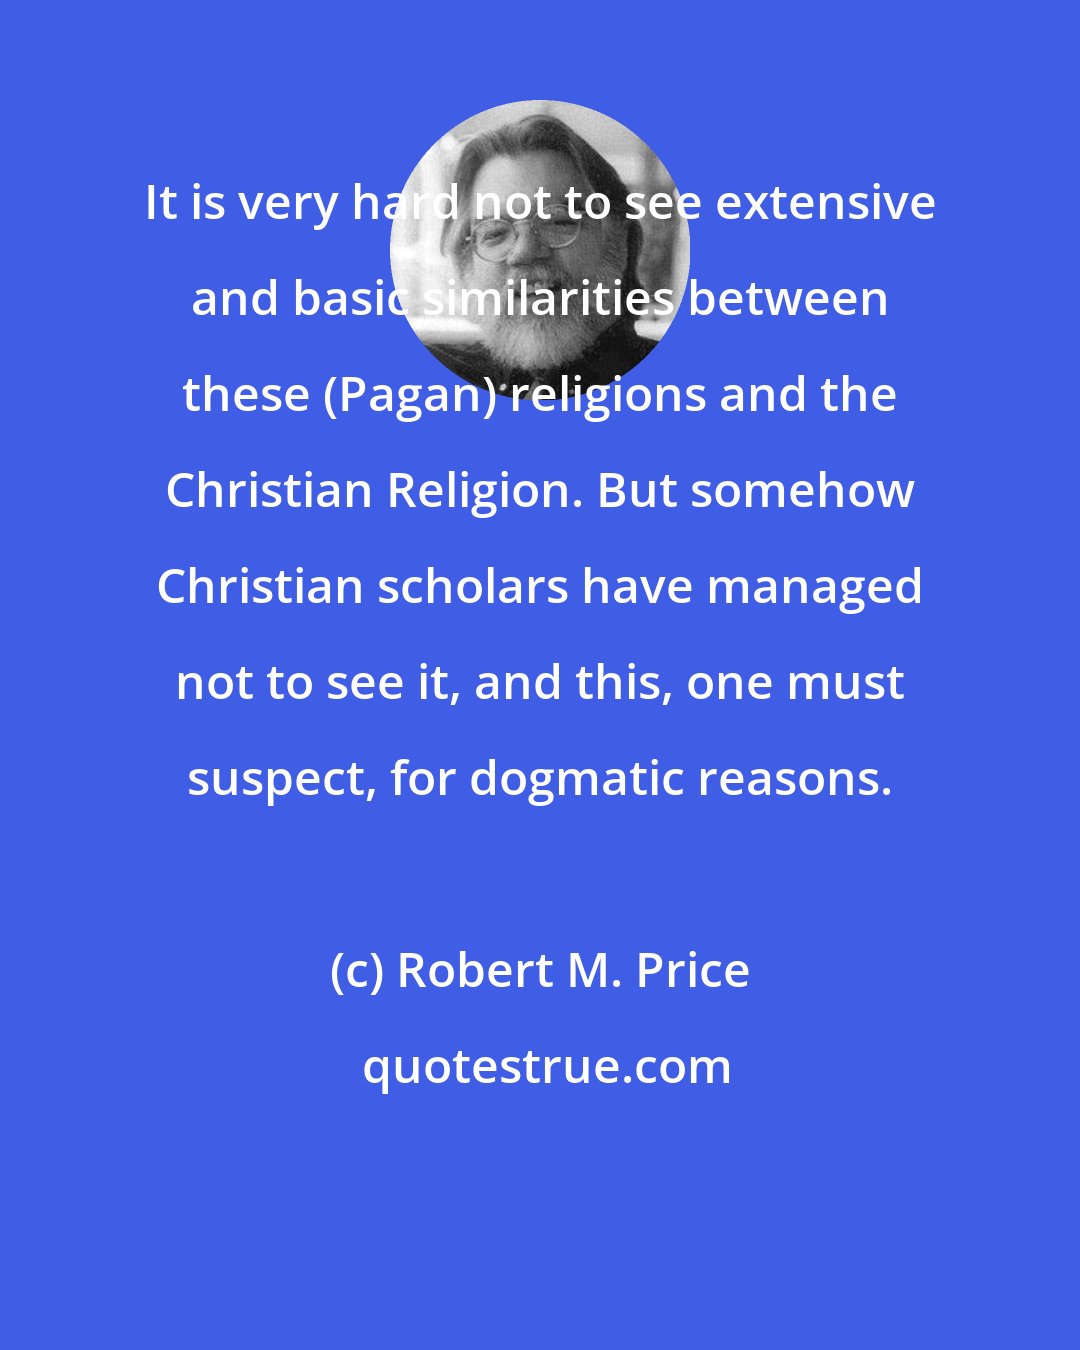 Robert M. Price: It is very hard not to see extensive and basic similarities between these (Pagan) religions and the Christian Religion. But somehow Christian scholars have managed not to see it, and this, one must suspect, for dogmatic reasons.